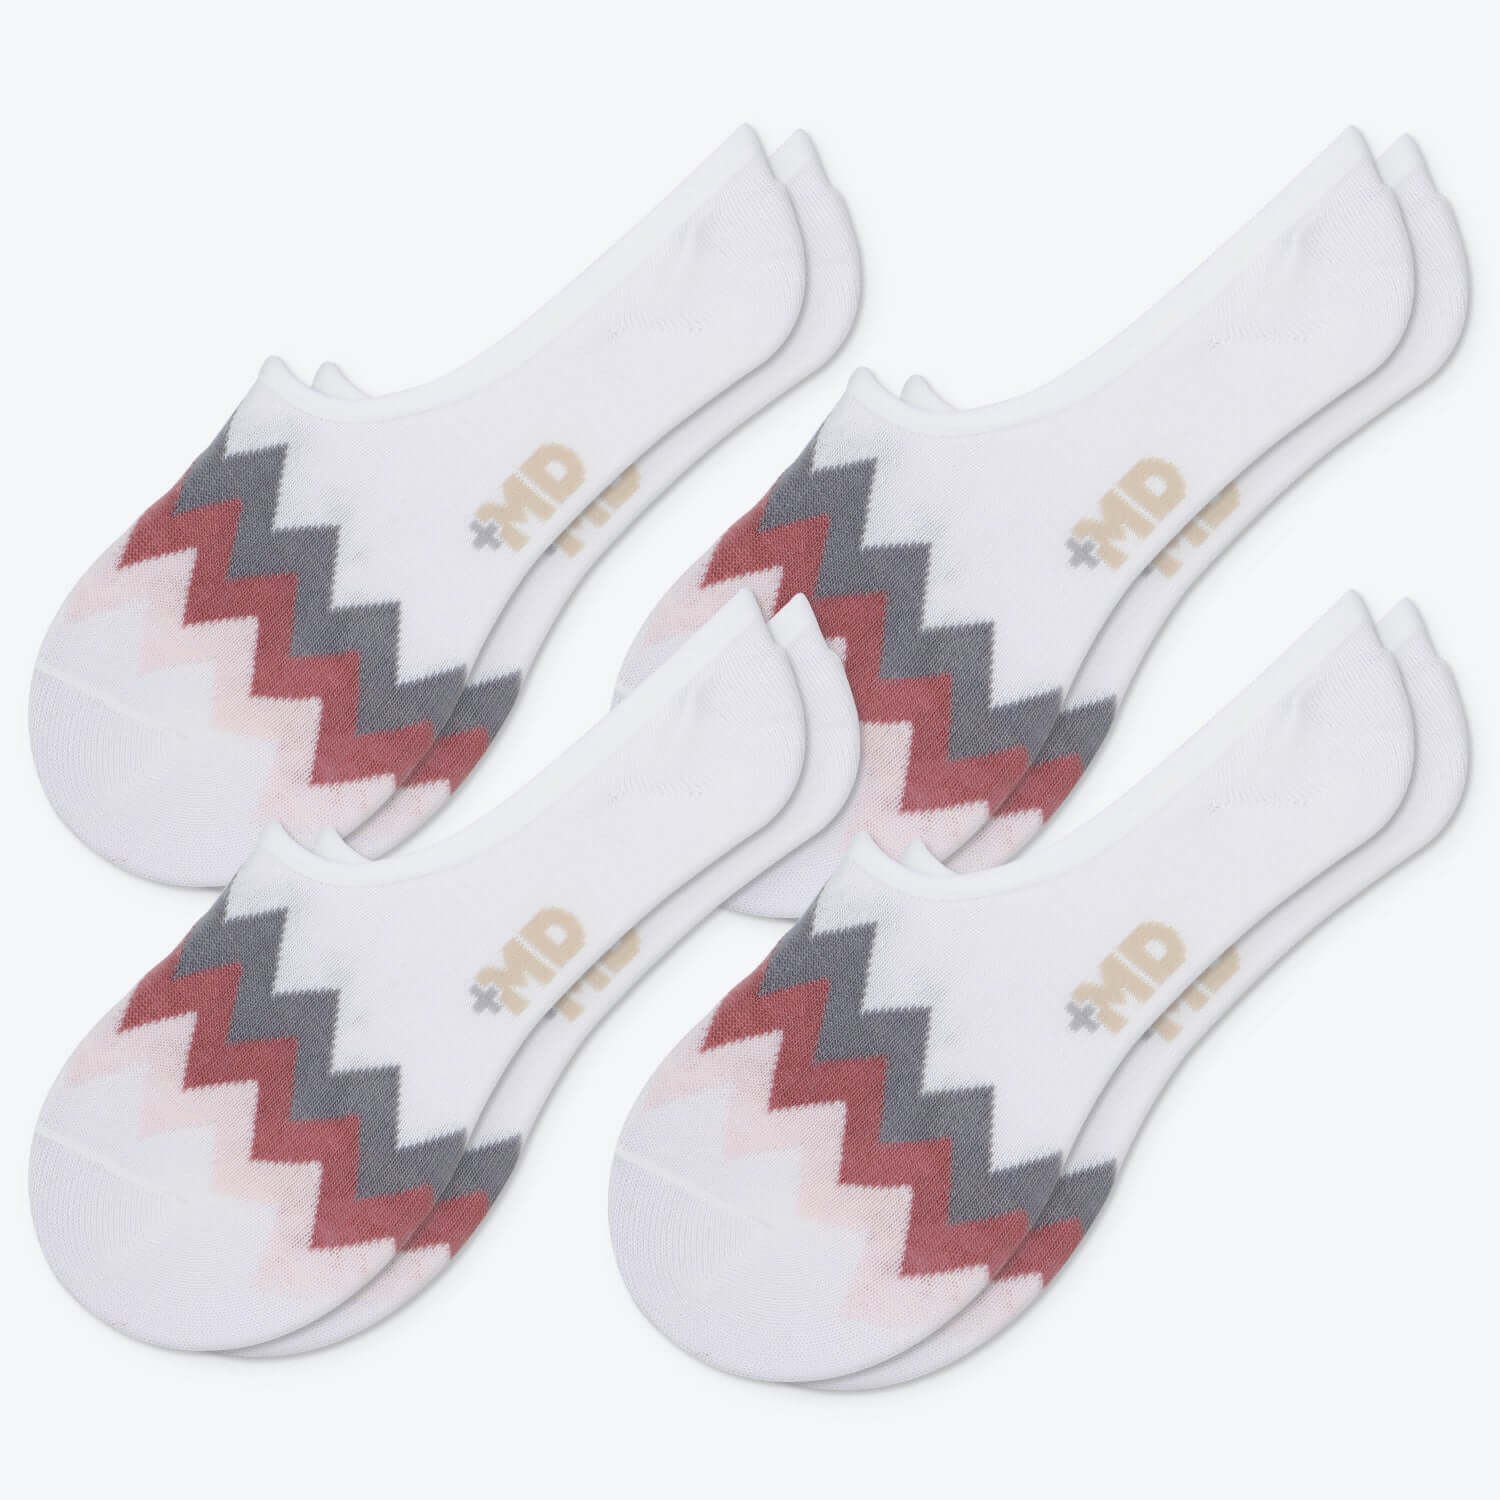 Indian Style Bamboo Liner Socks, Non Slip, 4 Pairs - md-diab